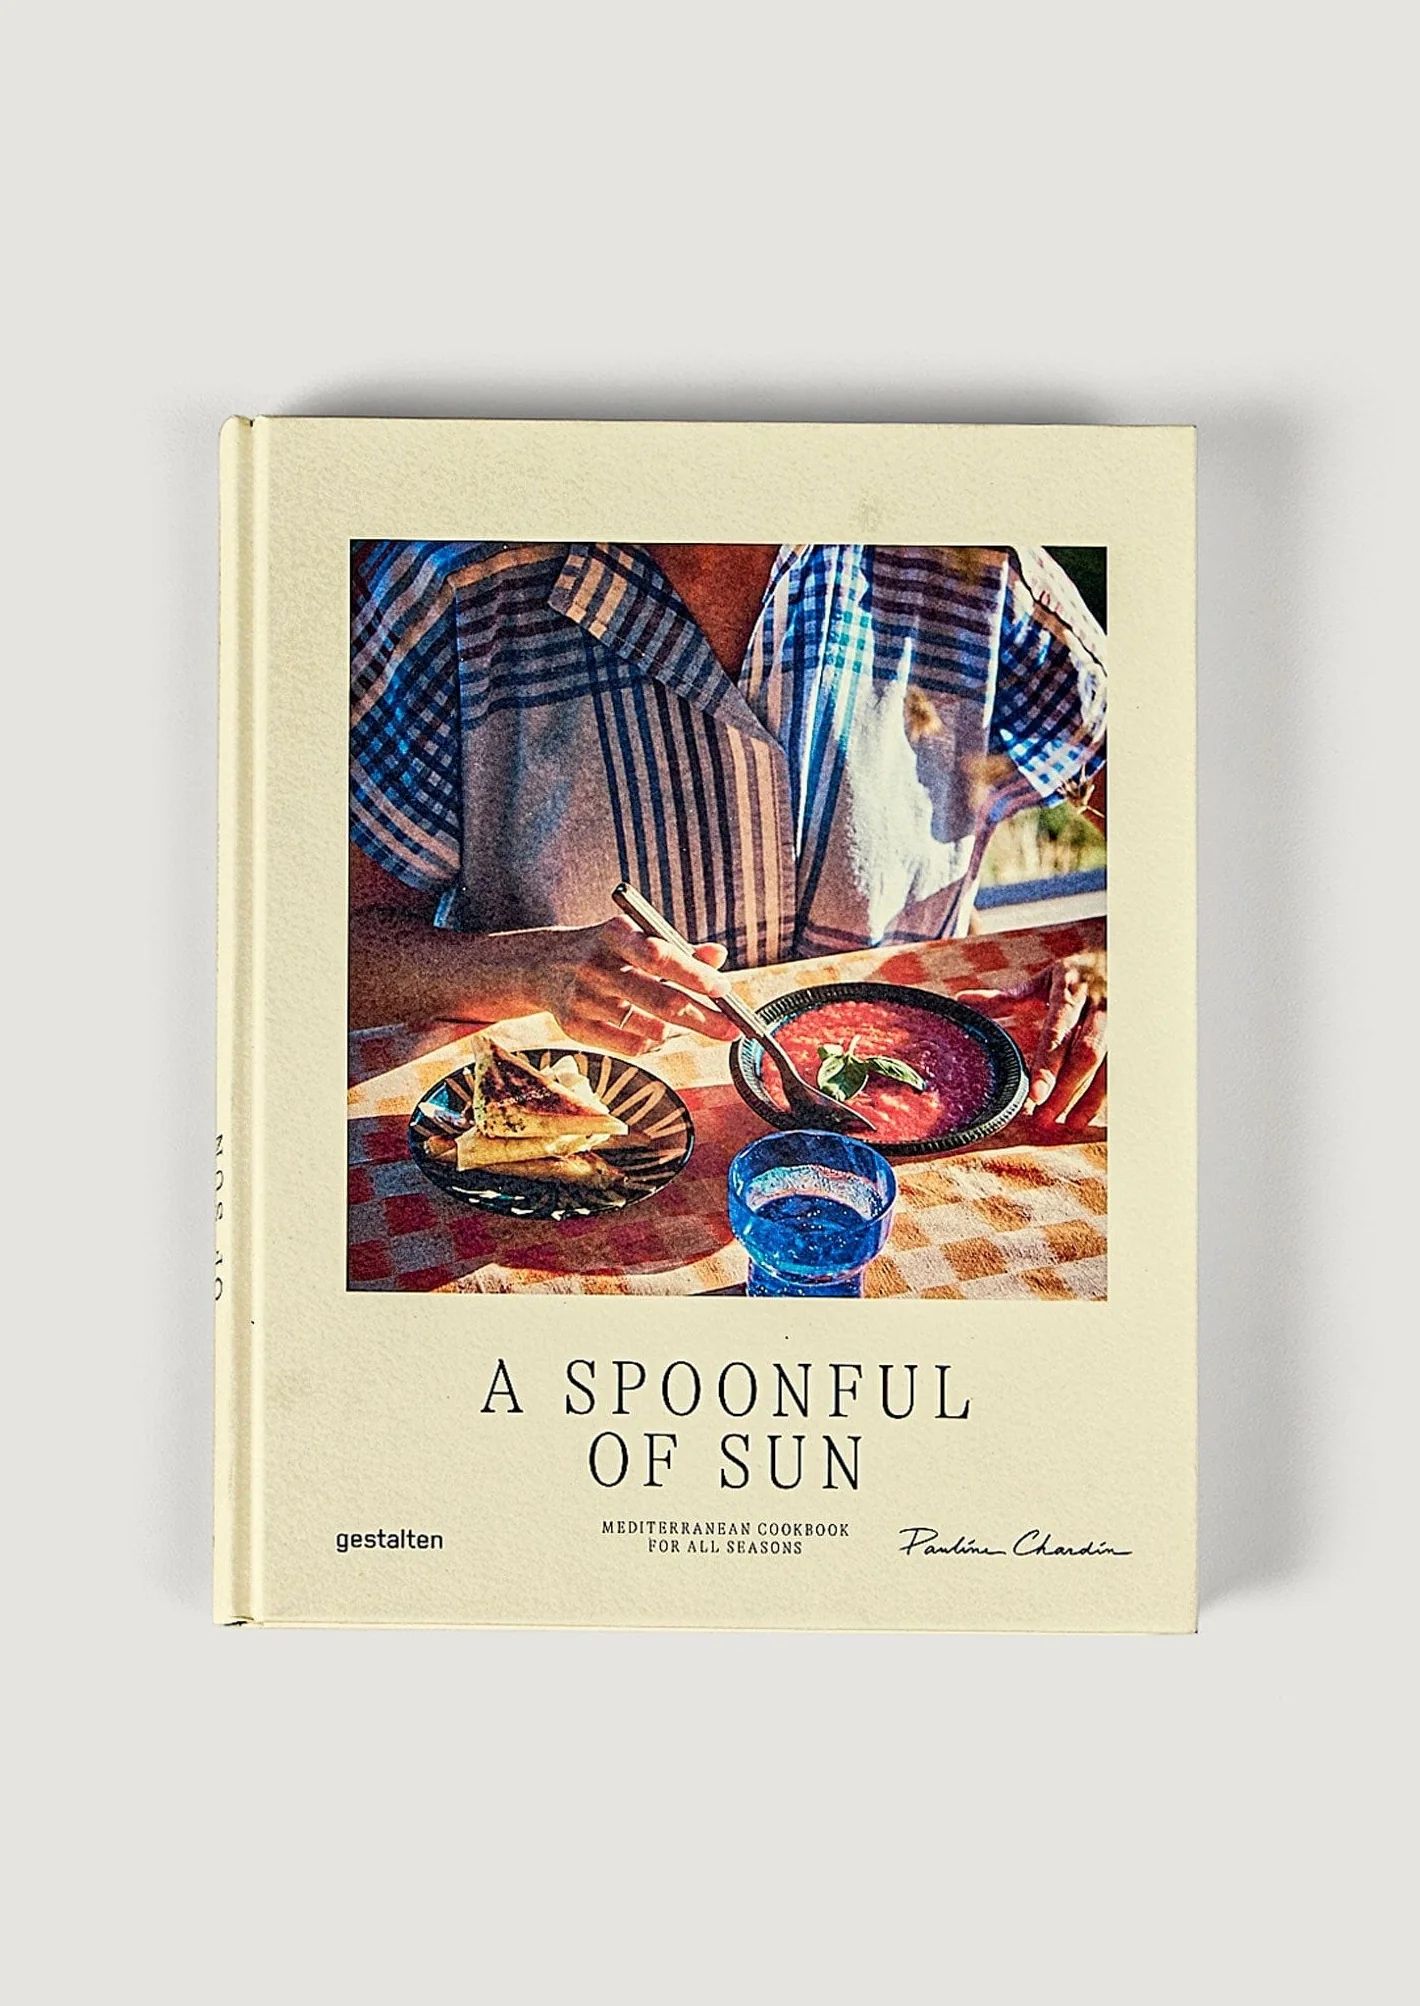 Coffee Table Recipe Cookbook - "A Spoonful Of Sun" | Afloral